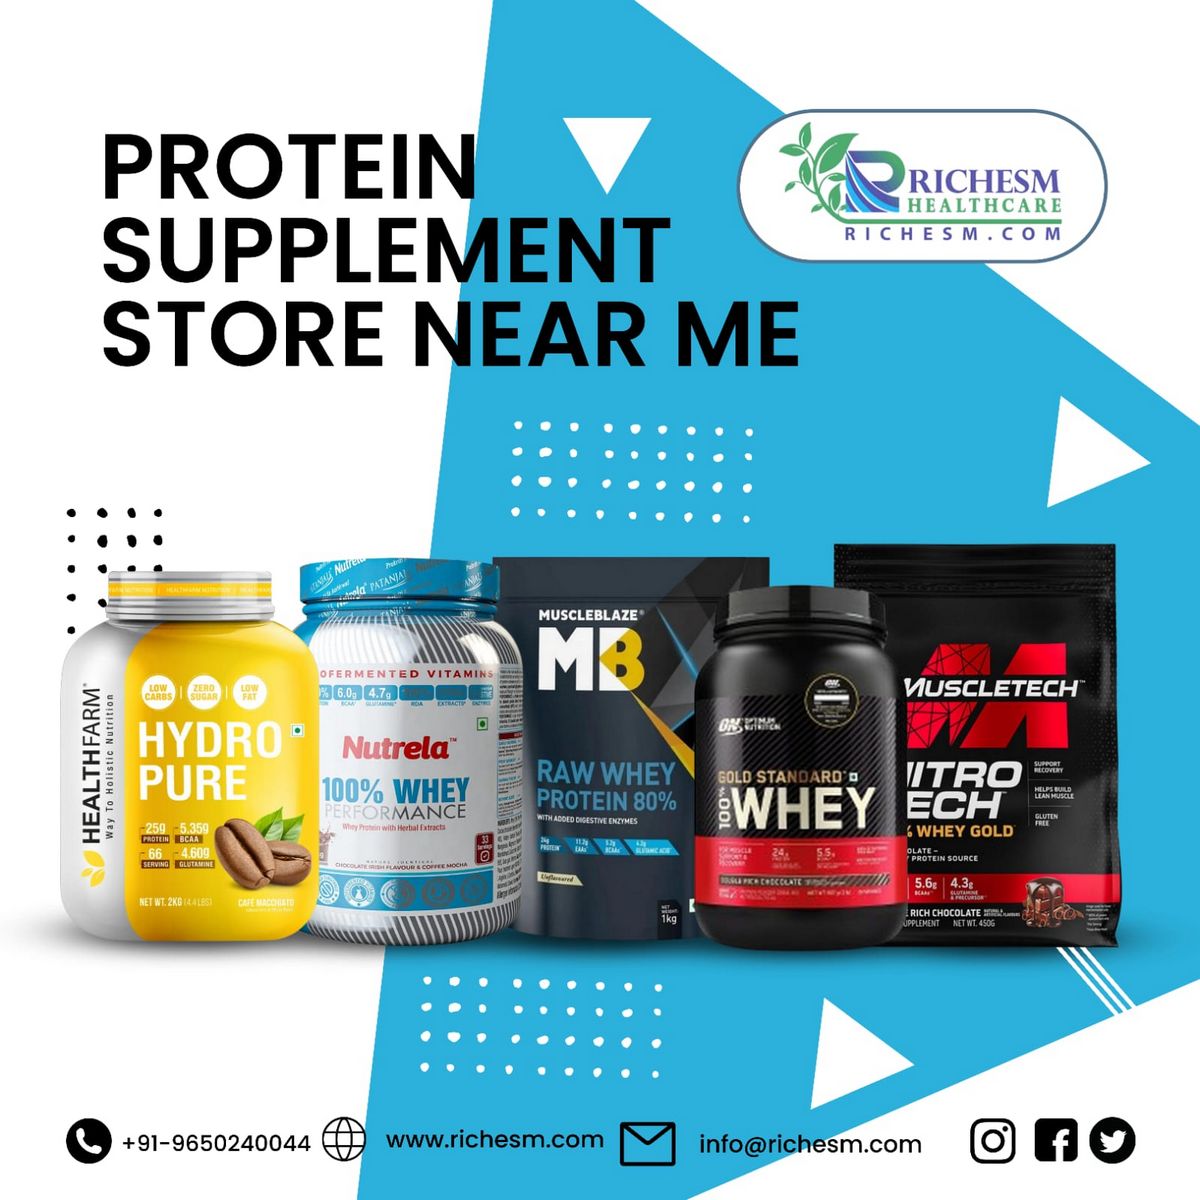 Protein Supplement Store Nearby You